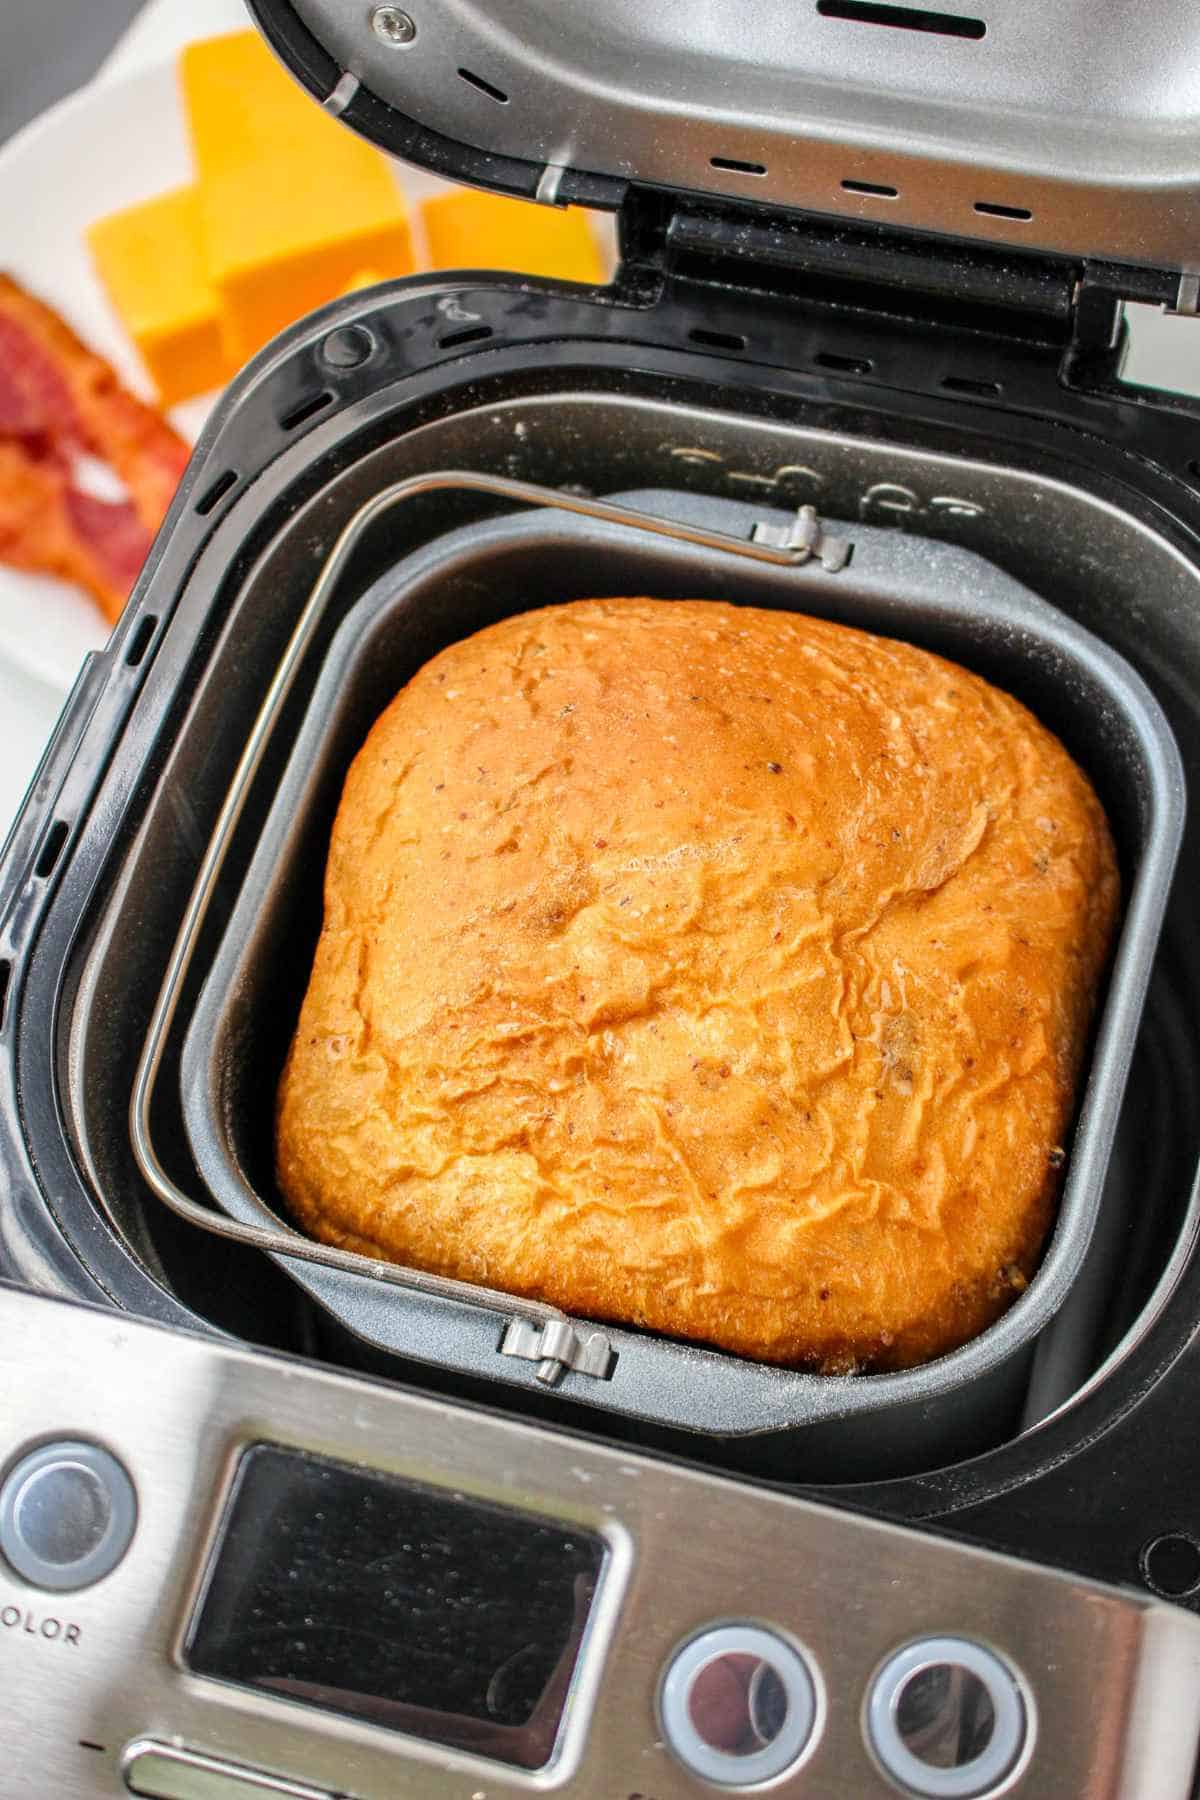 looking down into a bread machine with a loaf of fresh baked bread inside.